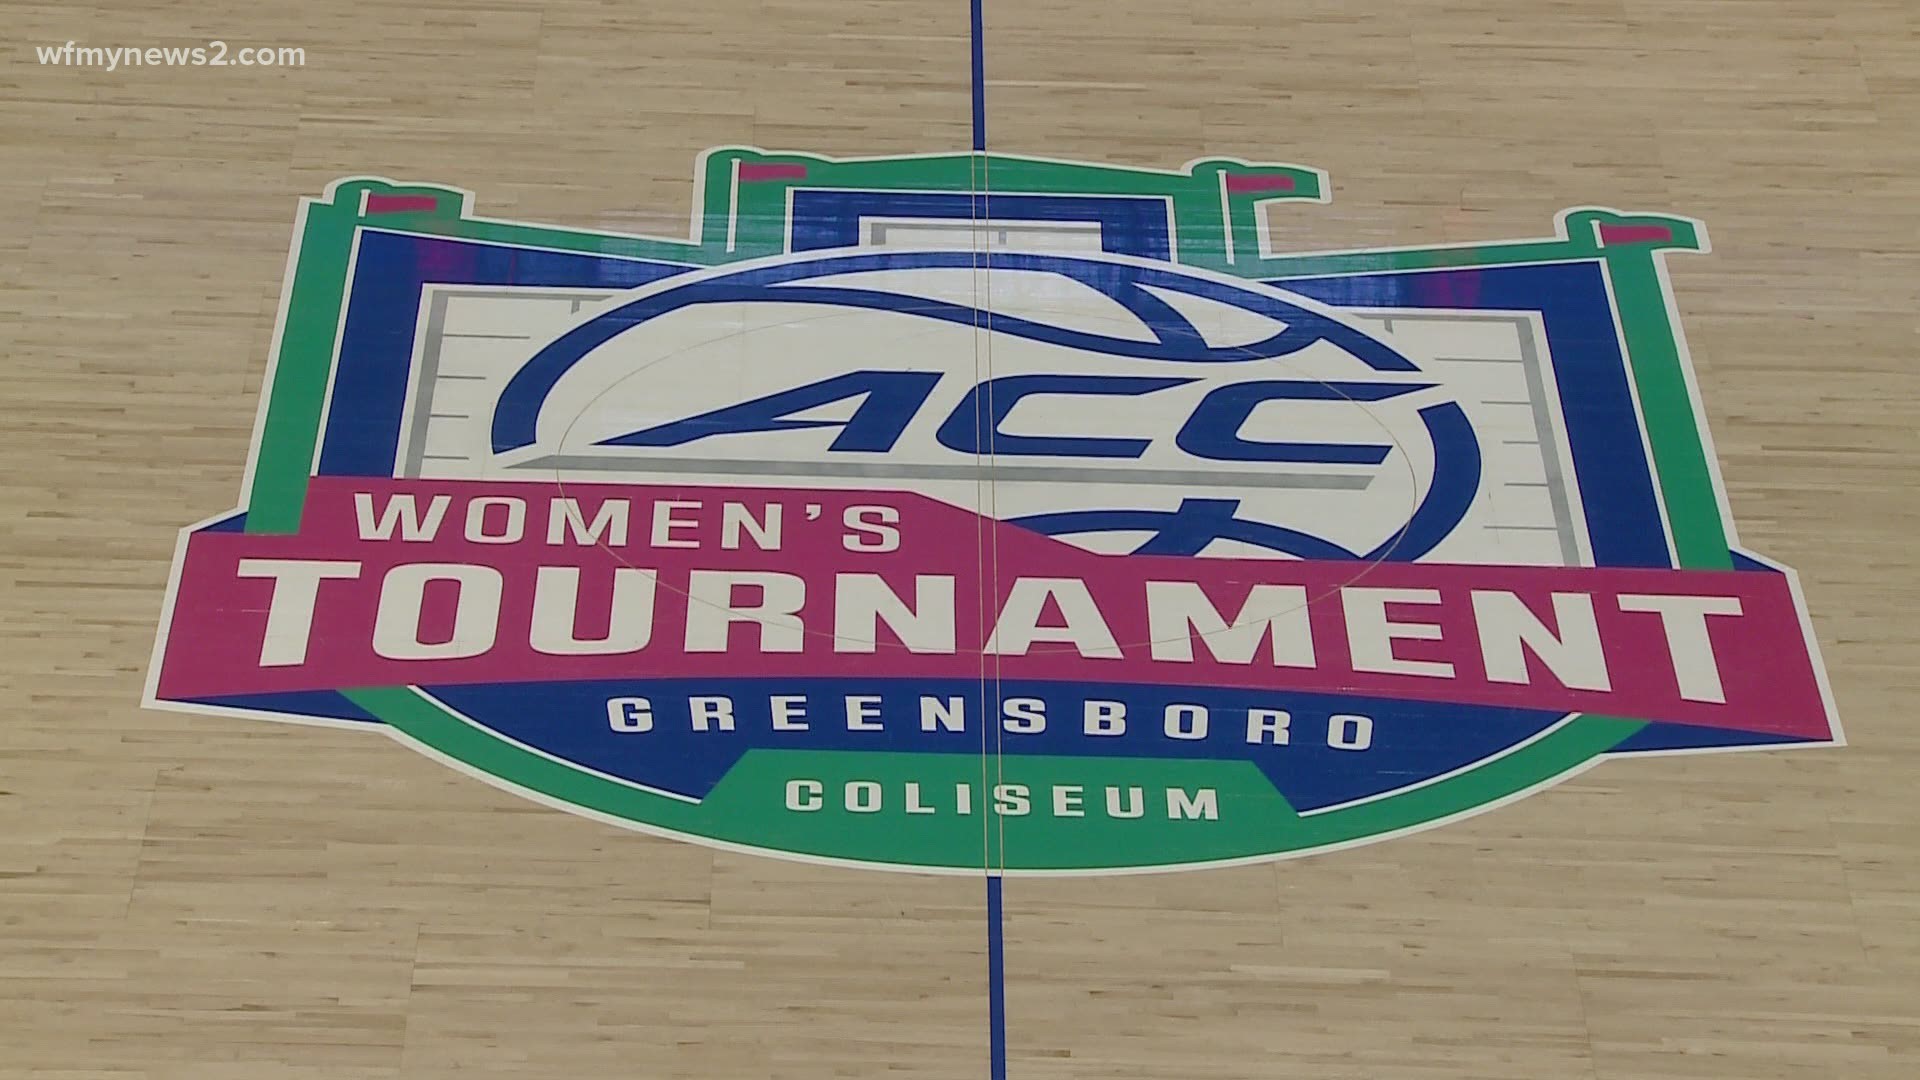 Crews are preparing to safely welcome both teams and fans for the men’s and women’s ACC basketball tournaments.